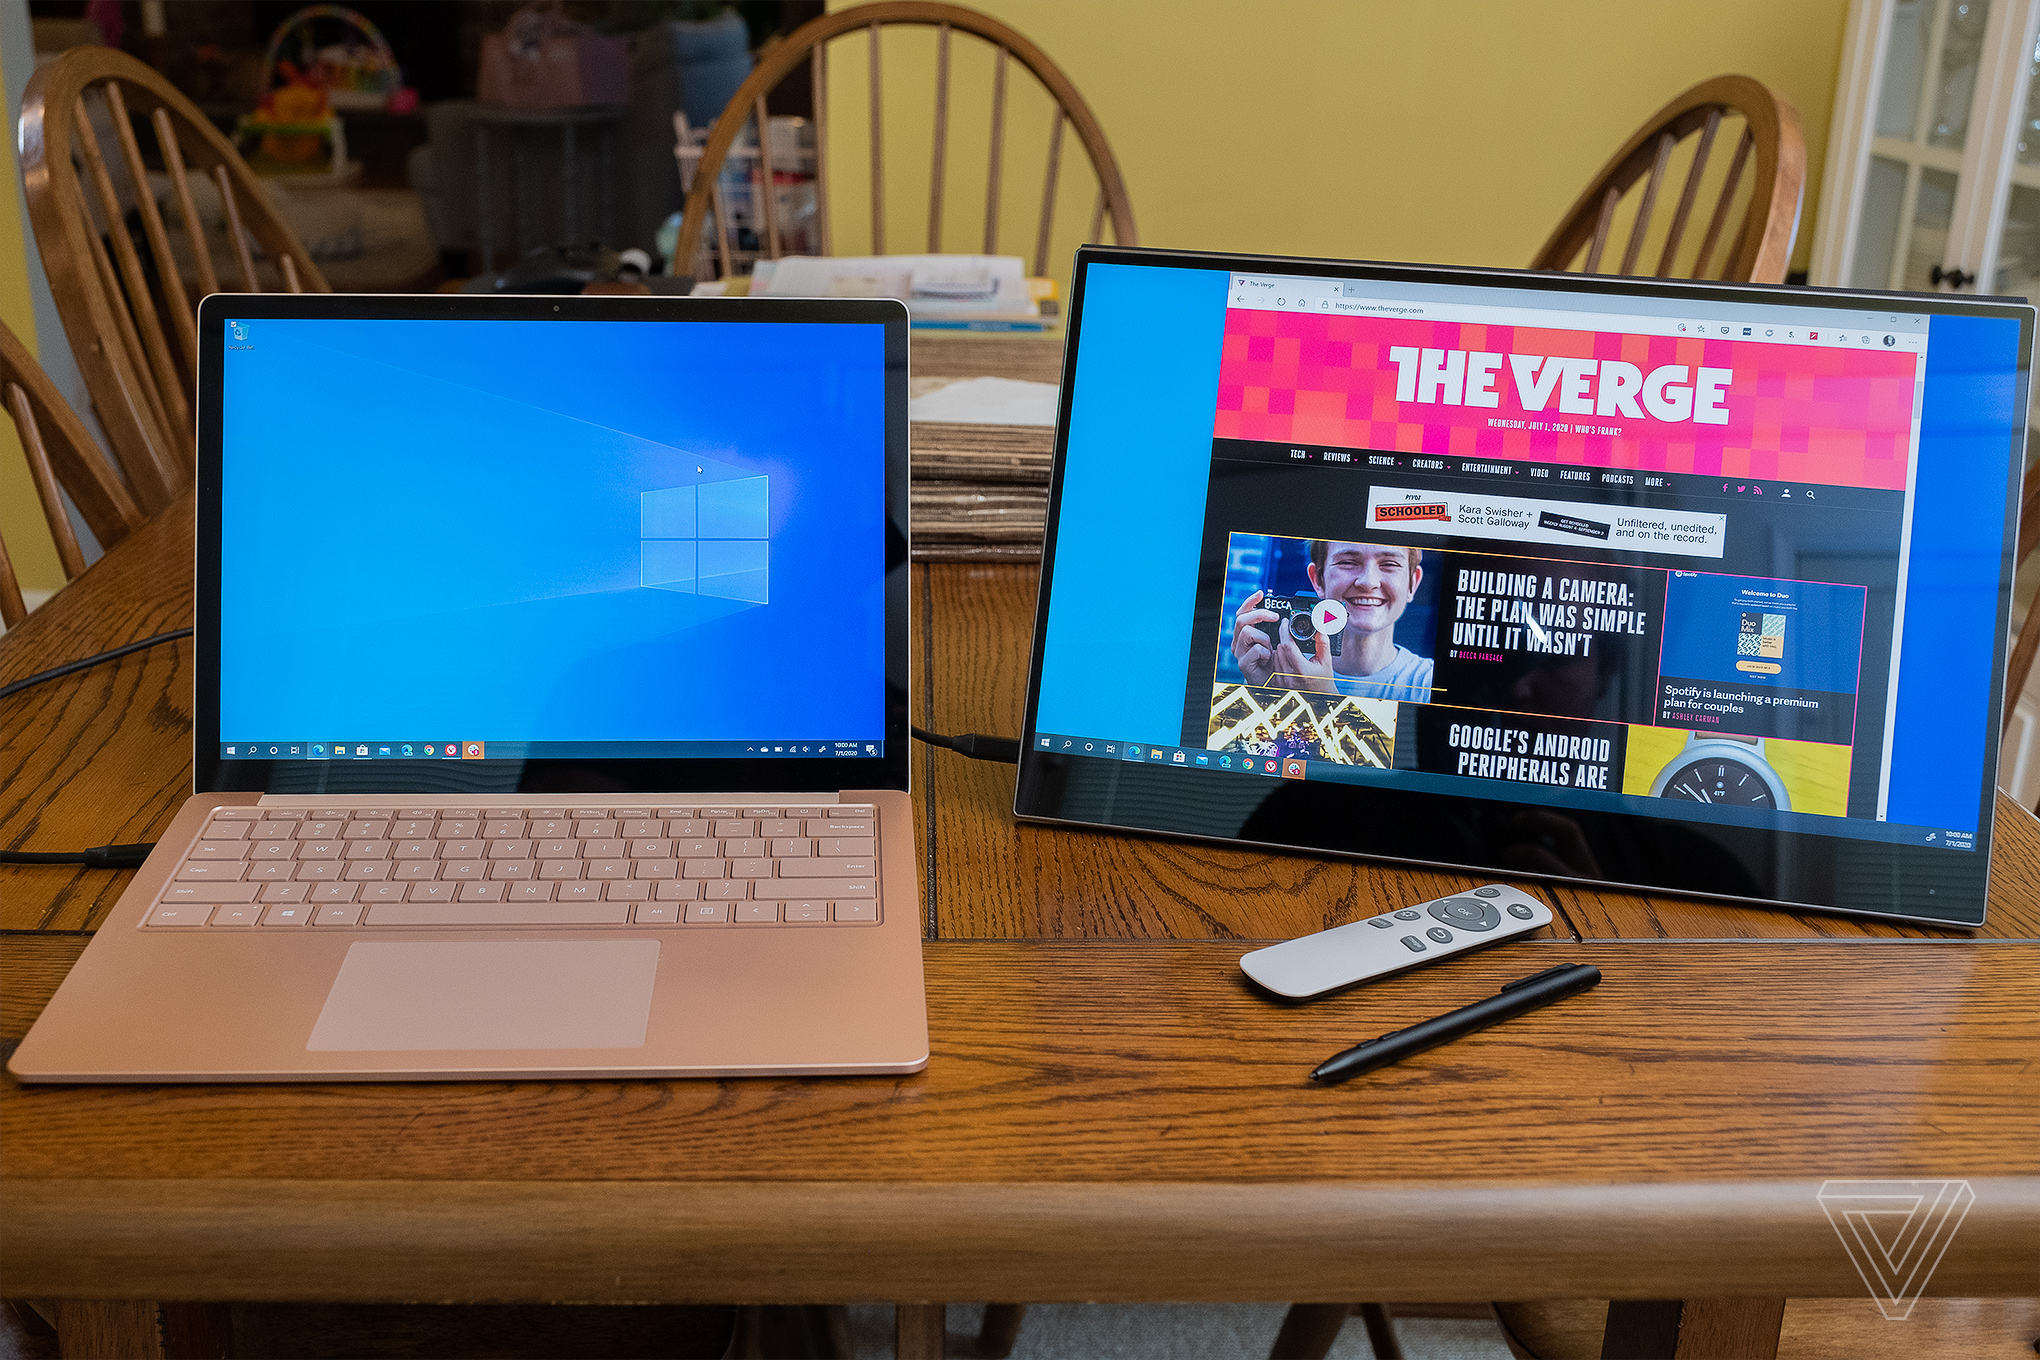 The Ananta touchscreen portable display plugged into a Surface Laptop 3 on a wooden table.